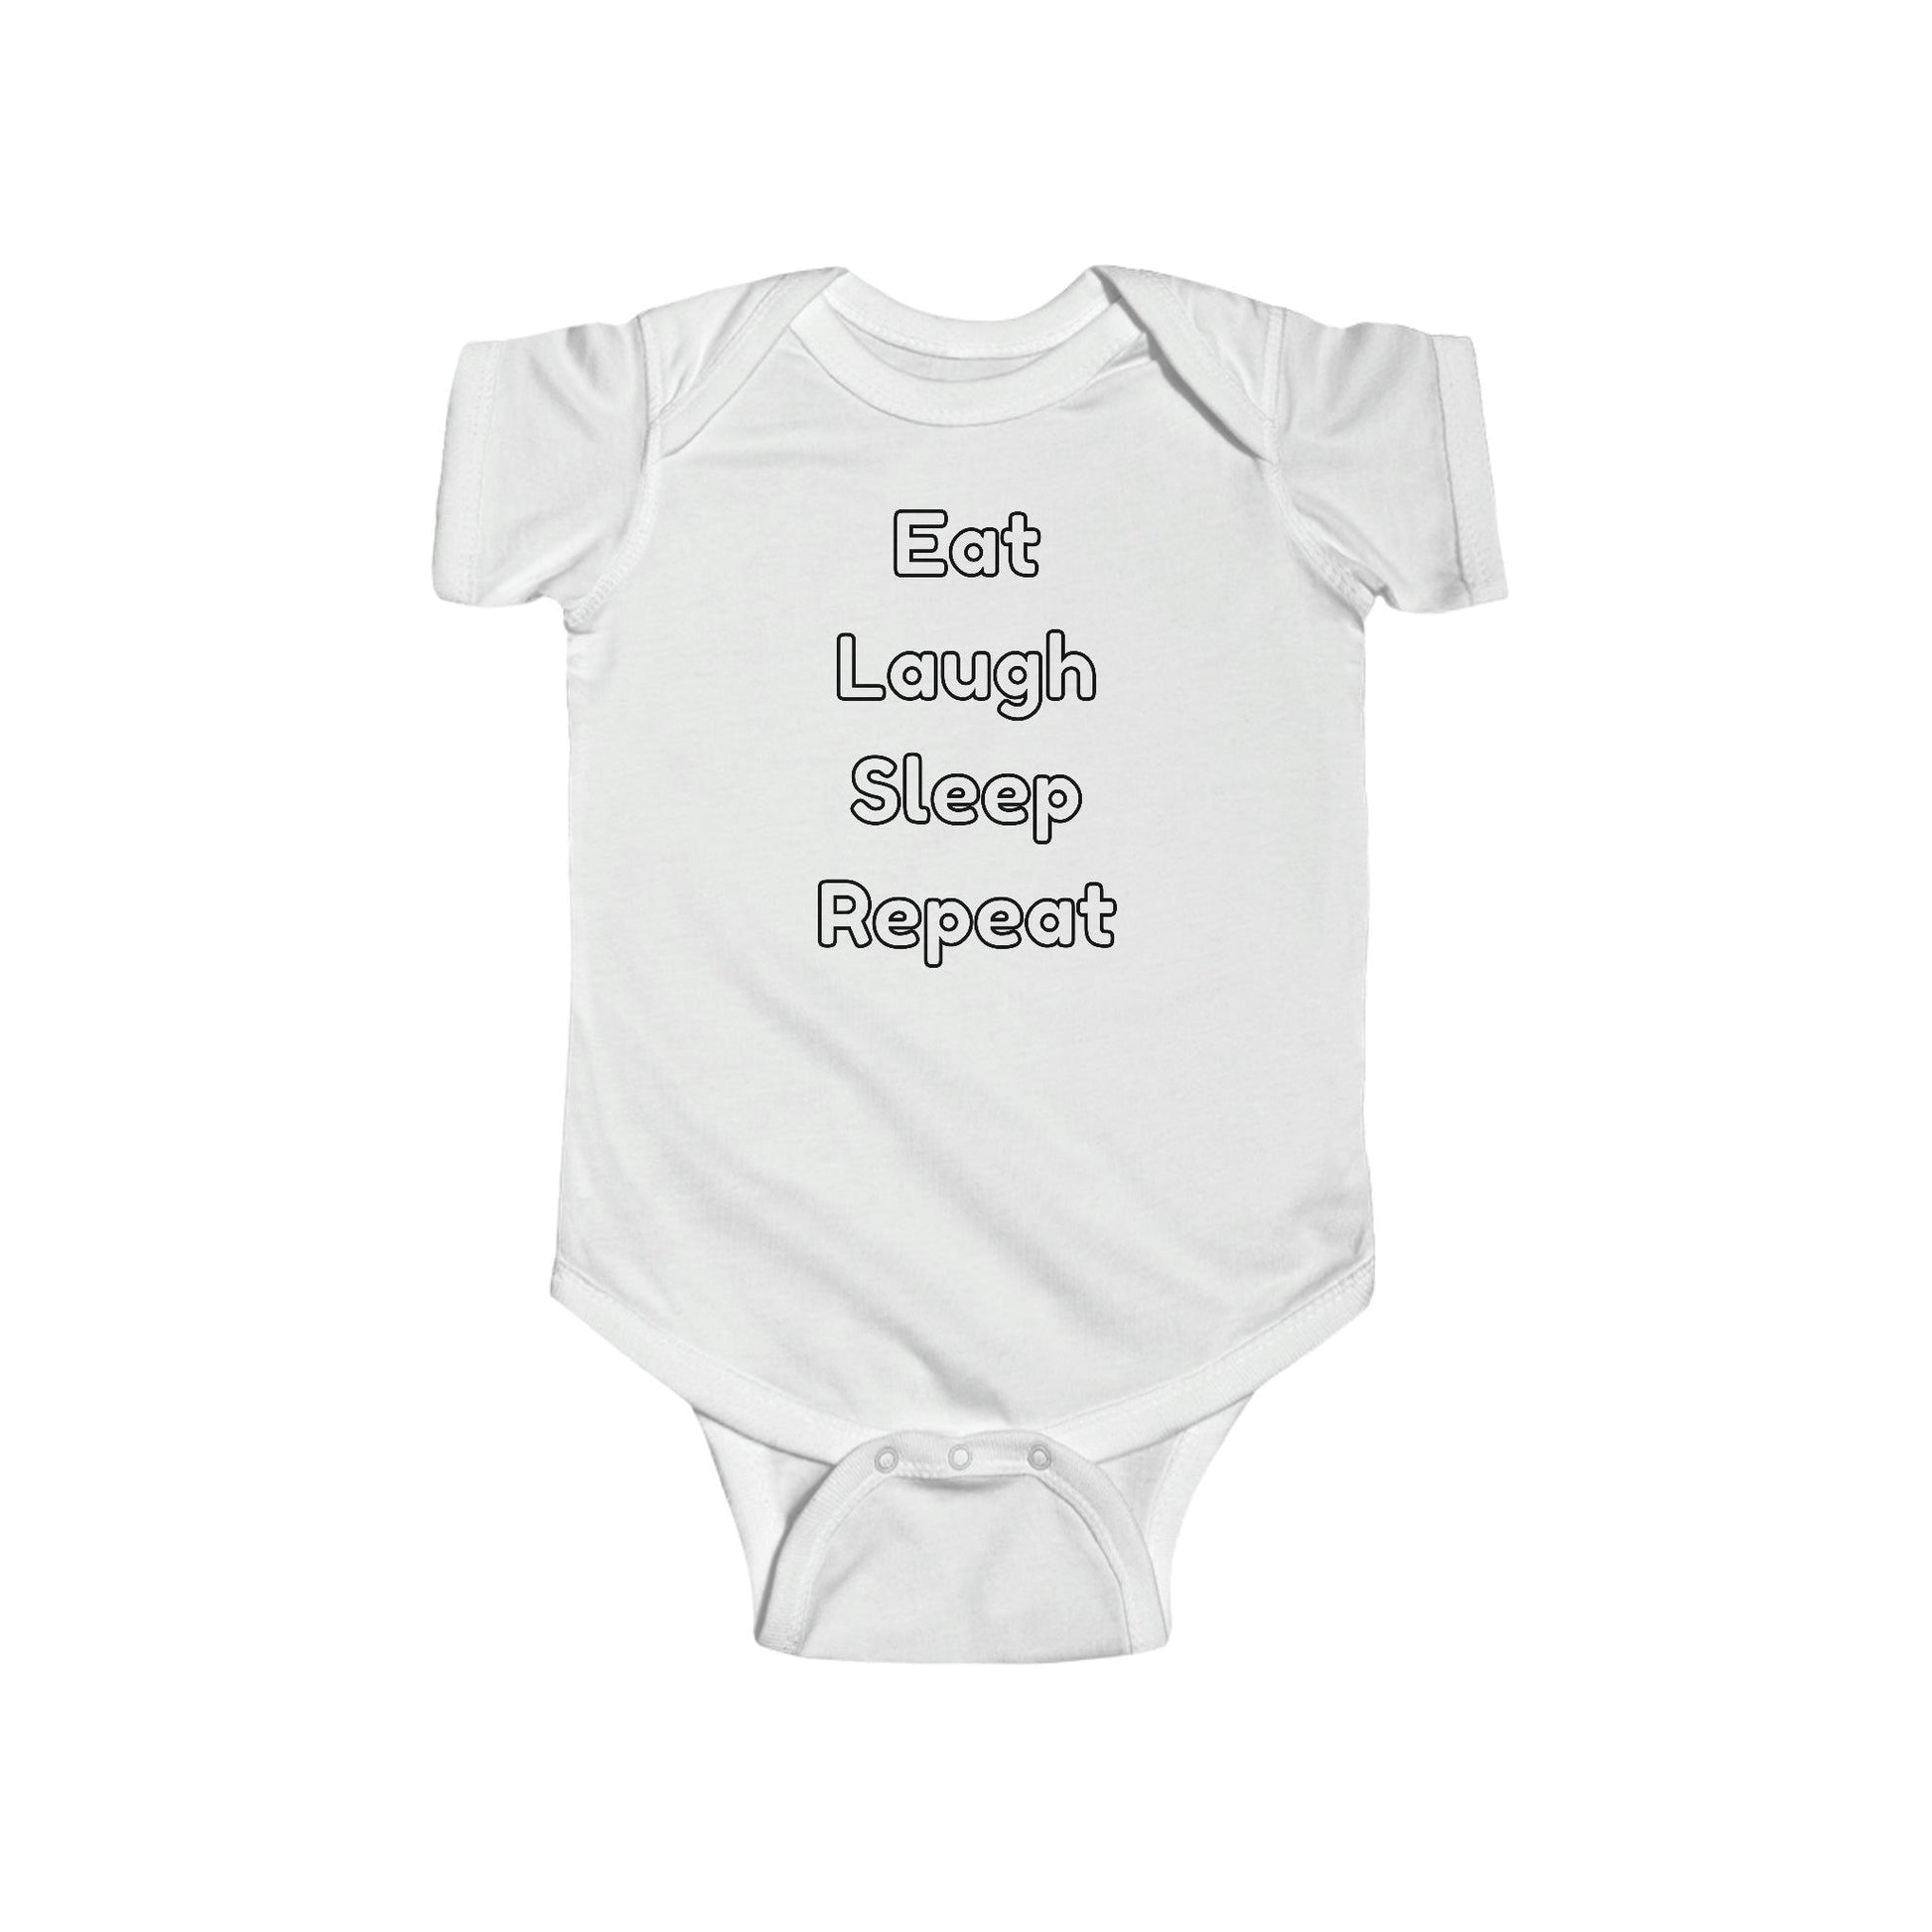 Baby Onesies, Baby gifts, Bodysuit, Baby clothes, Eat laugh sleep repeat - Giftsmojo